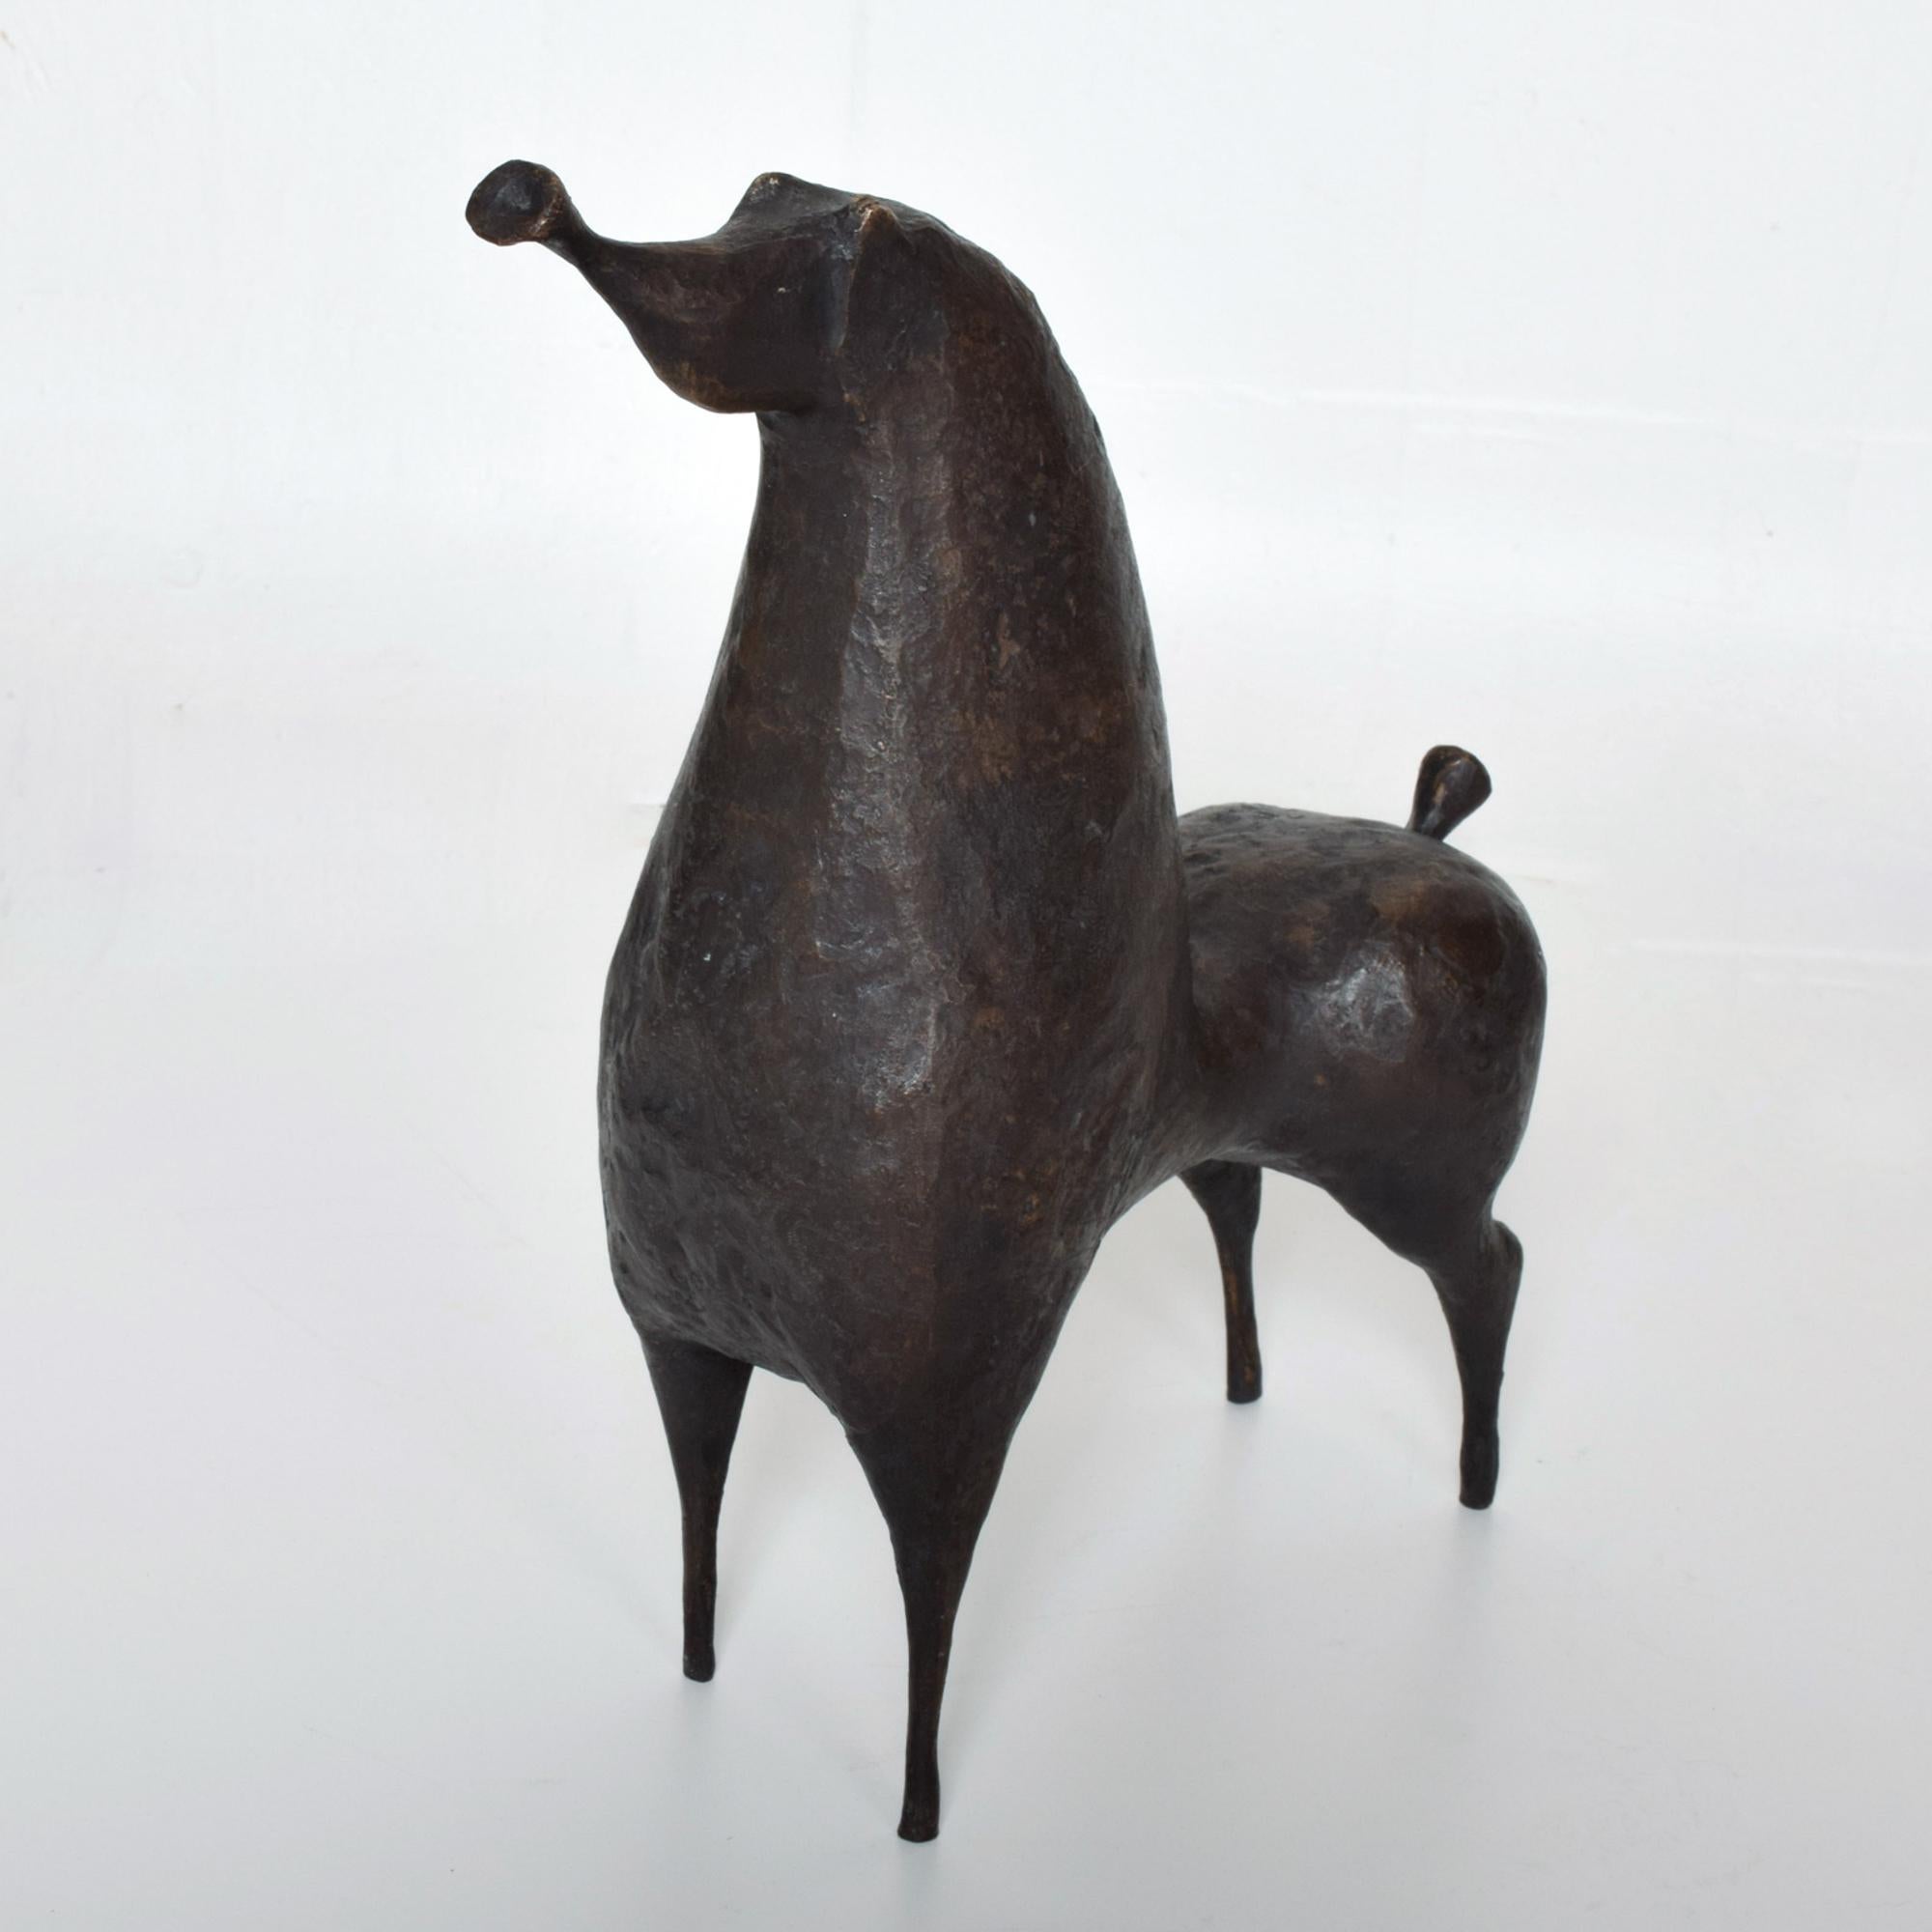 For your consideration: Bronze horse sculpture by Ramon Prats Spanish Artist. Abstract design presented in the style of Jack Boyd.
Artist Ramon Prats the son of a well regarded Catalan sculptor was born in Barcelona, Spain 1928. 
Prats moved to